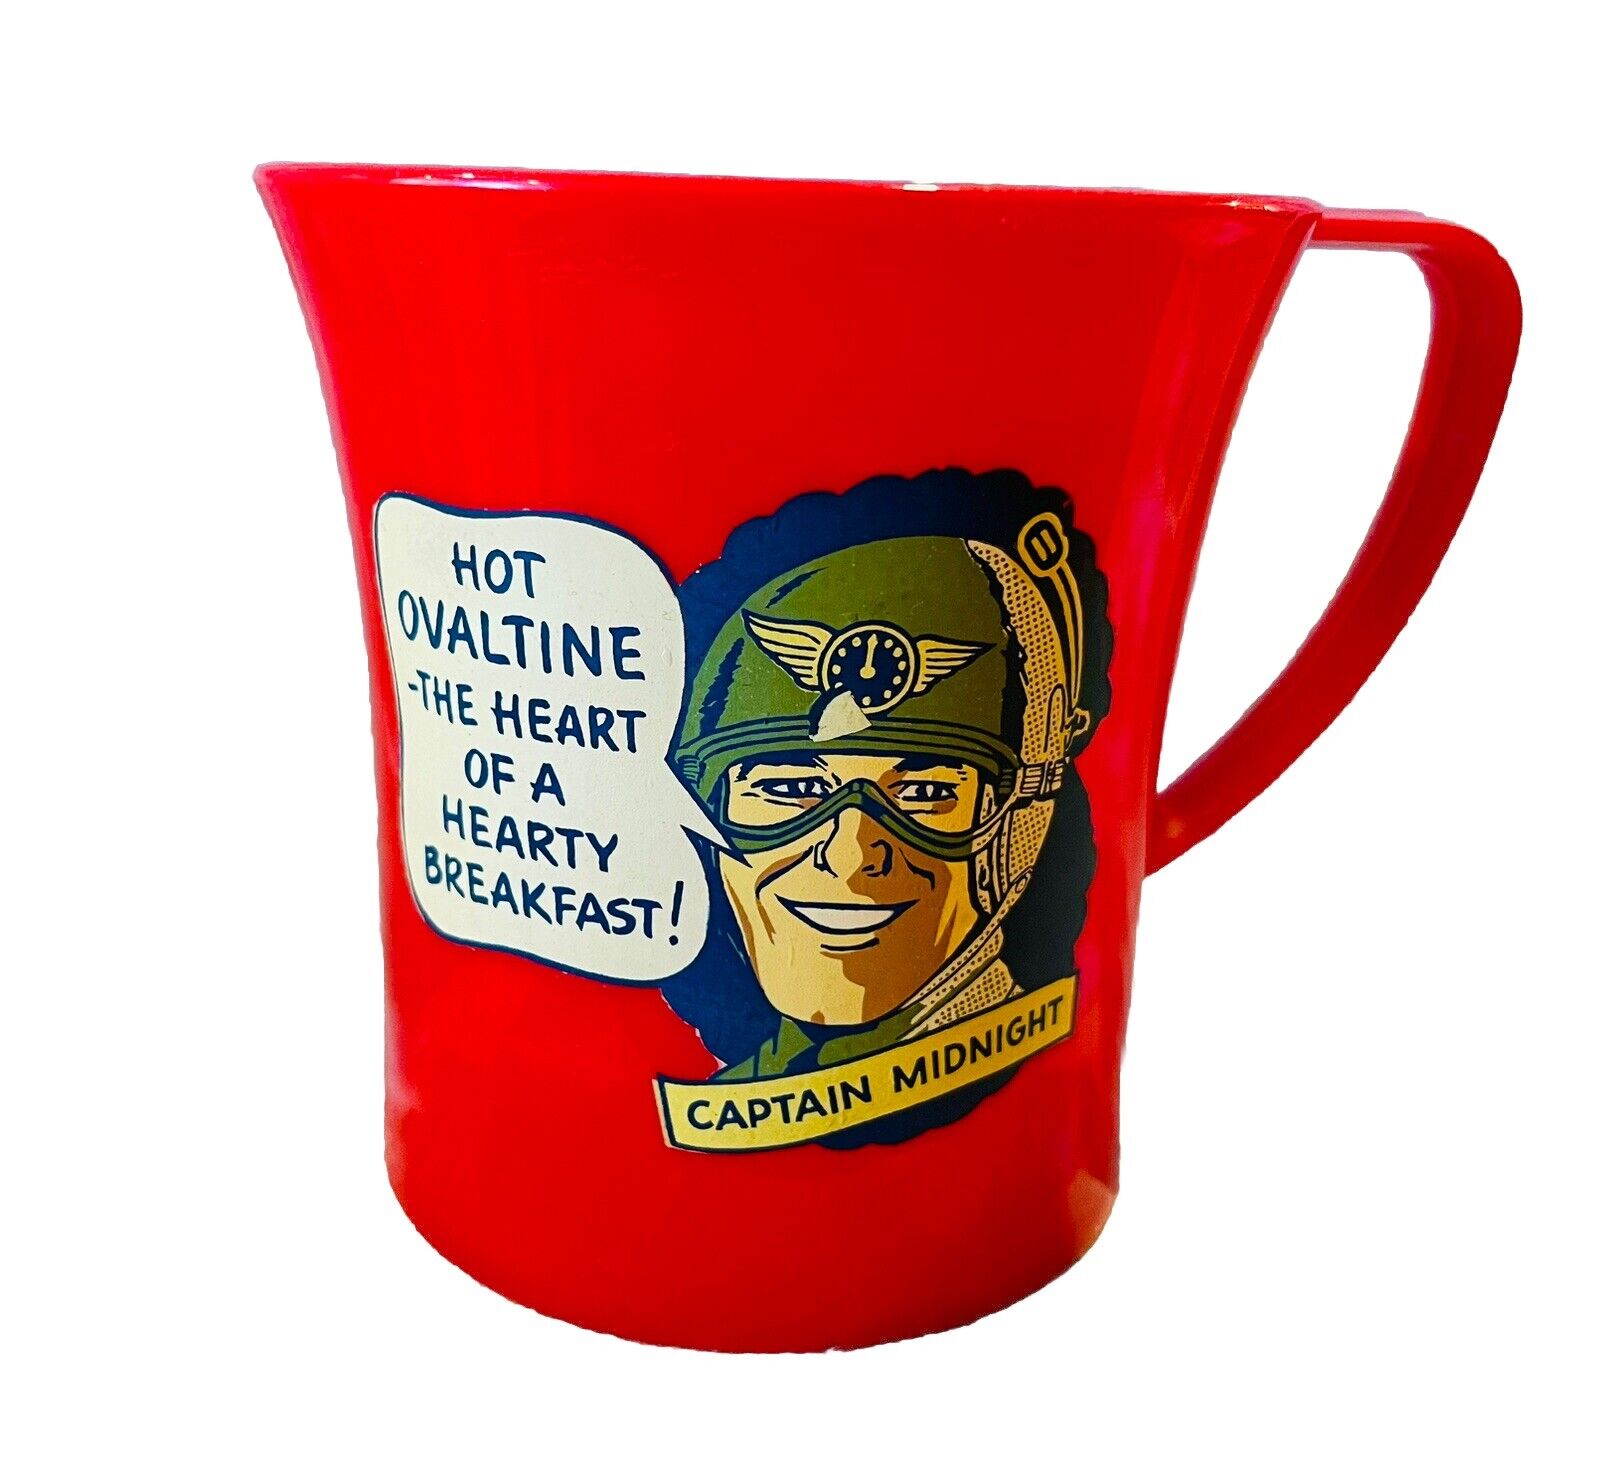 VTG Collectable Captain Midnight Ovaltine Mug with Decal 1953  -A+ ++Condition